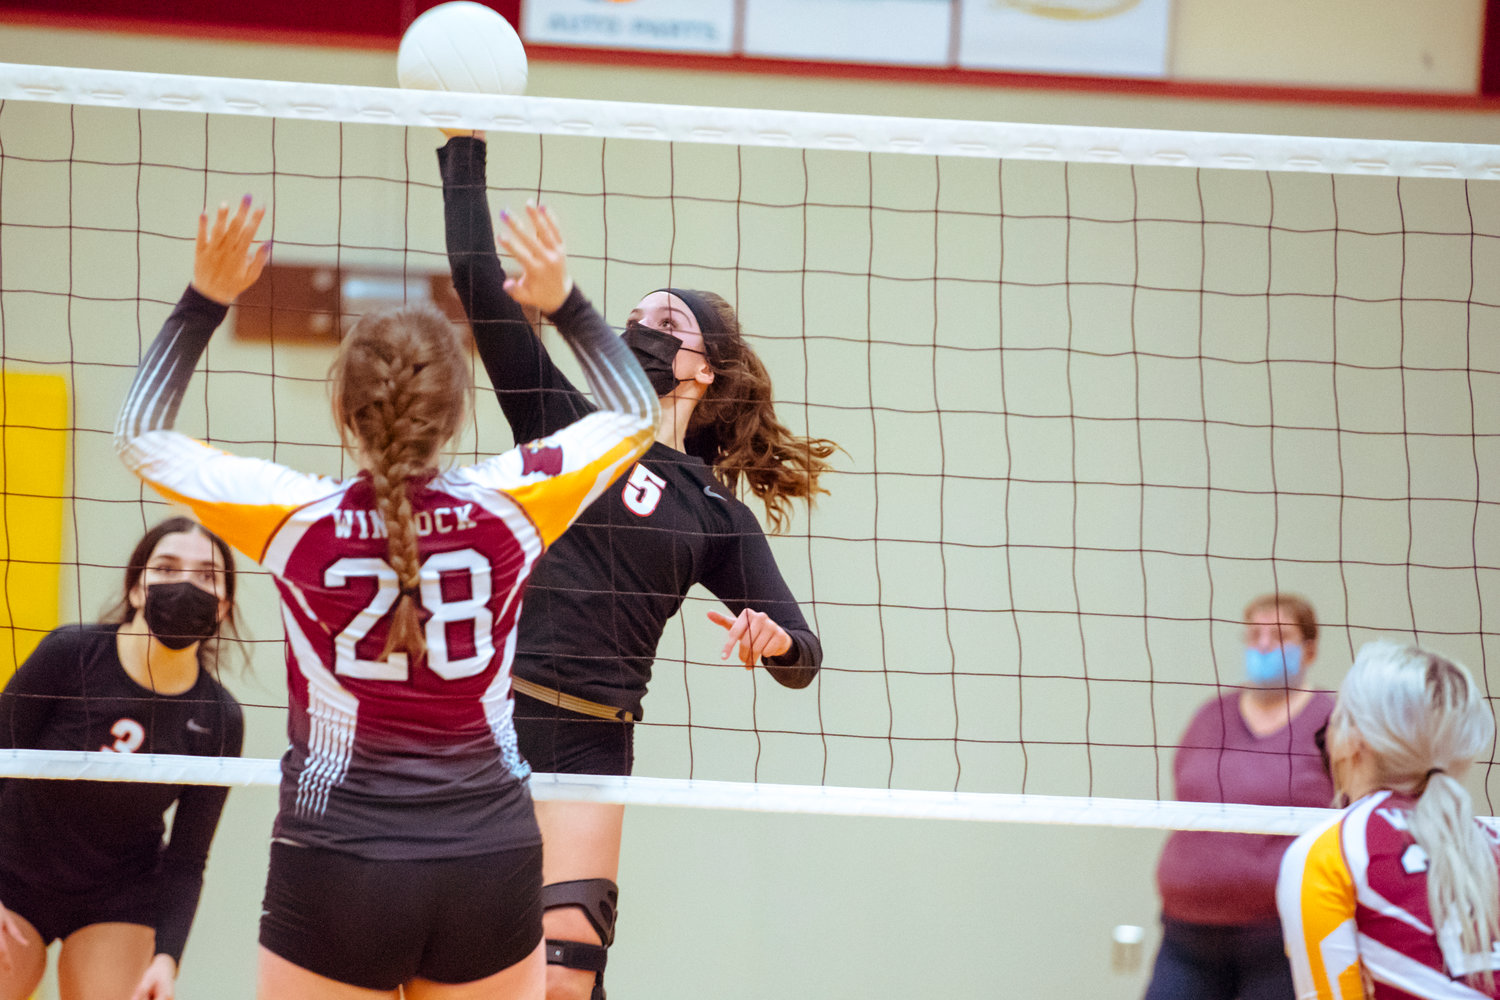 Toledo's Kate Demery (5) hits the ball during a game against the Cardinals played Monday night in Winlock.